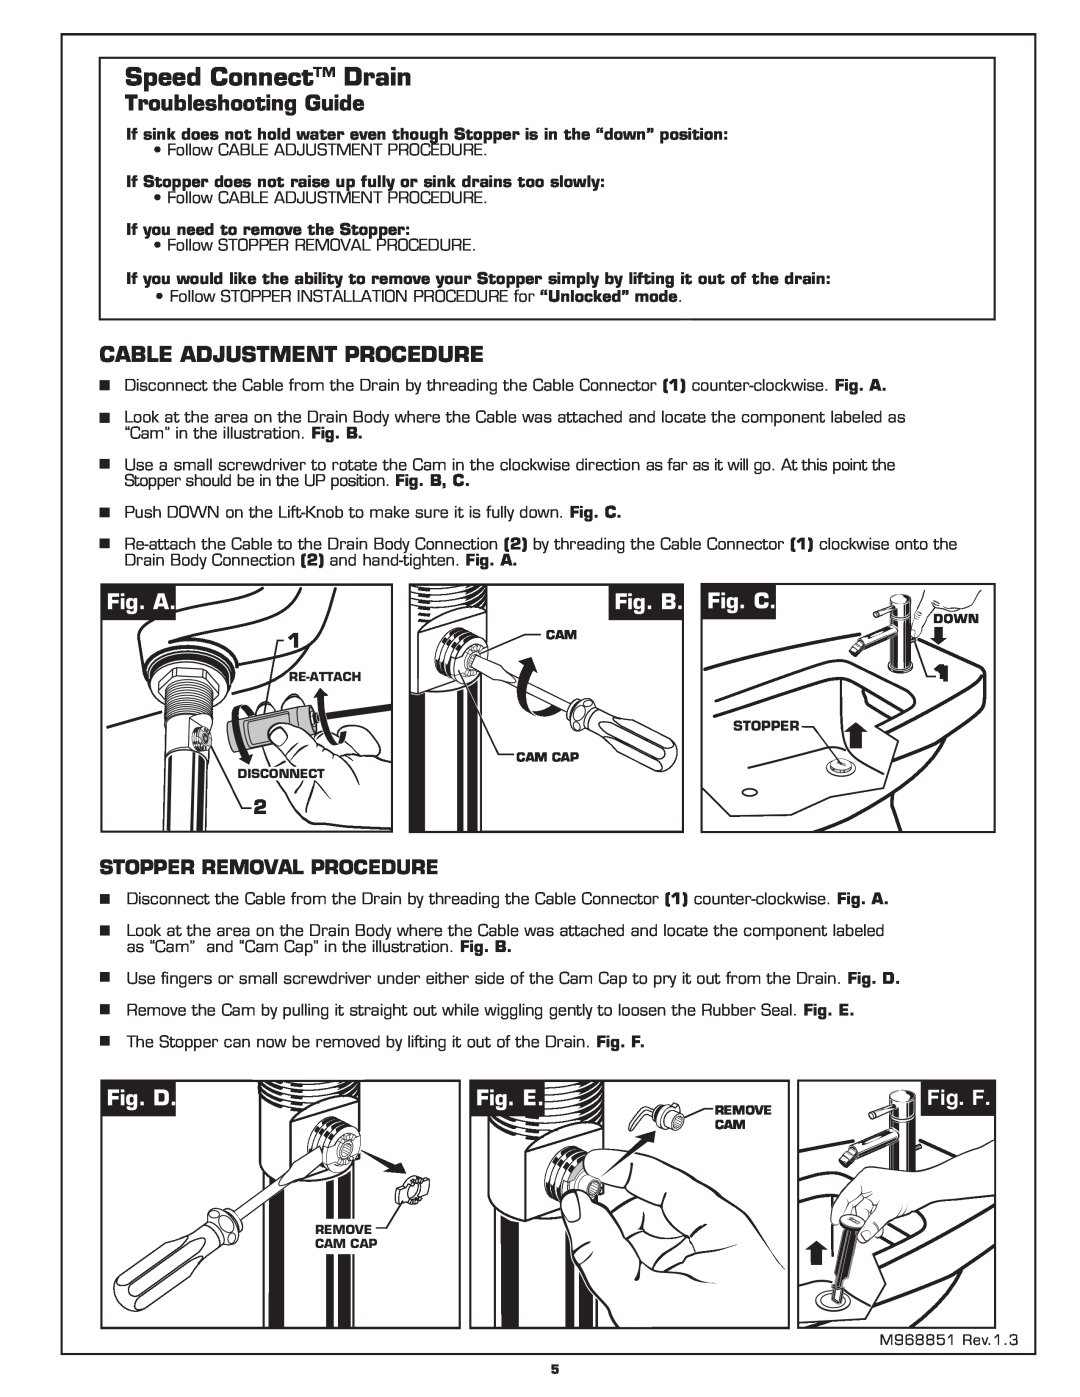 American Standard 2064.011 Troubleshooting Guide, Cable Adjustment Procedure, Fig. A, Fig. B, Fig. C, Fig. D, Fig. E 